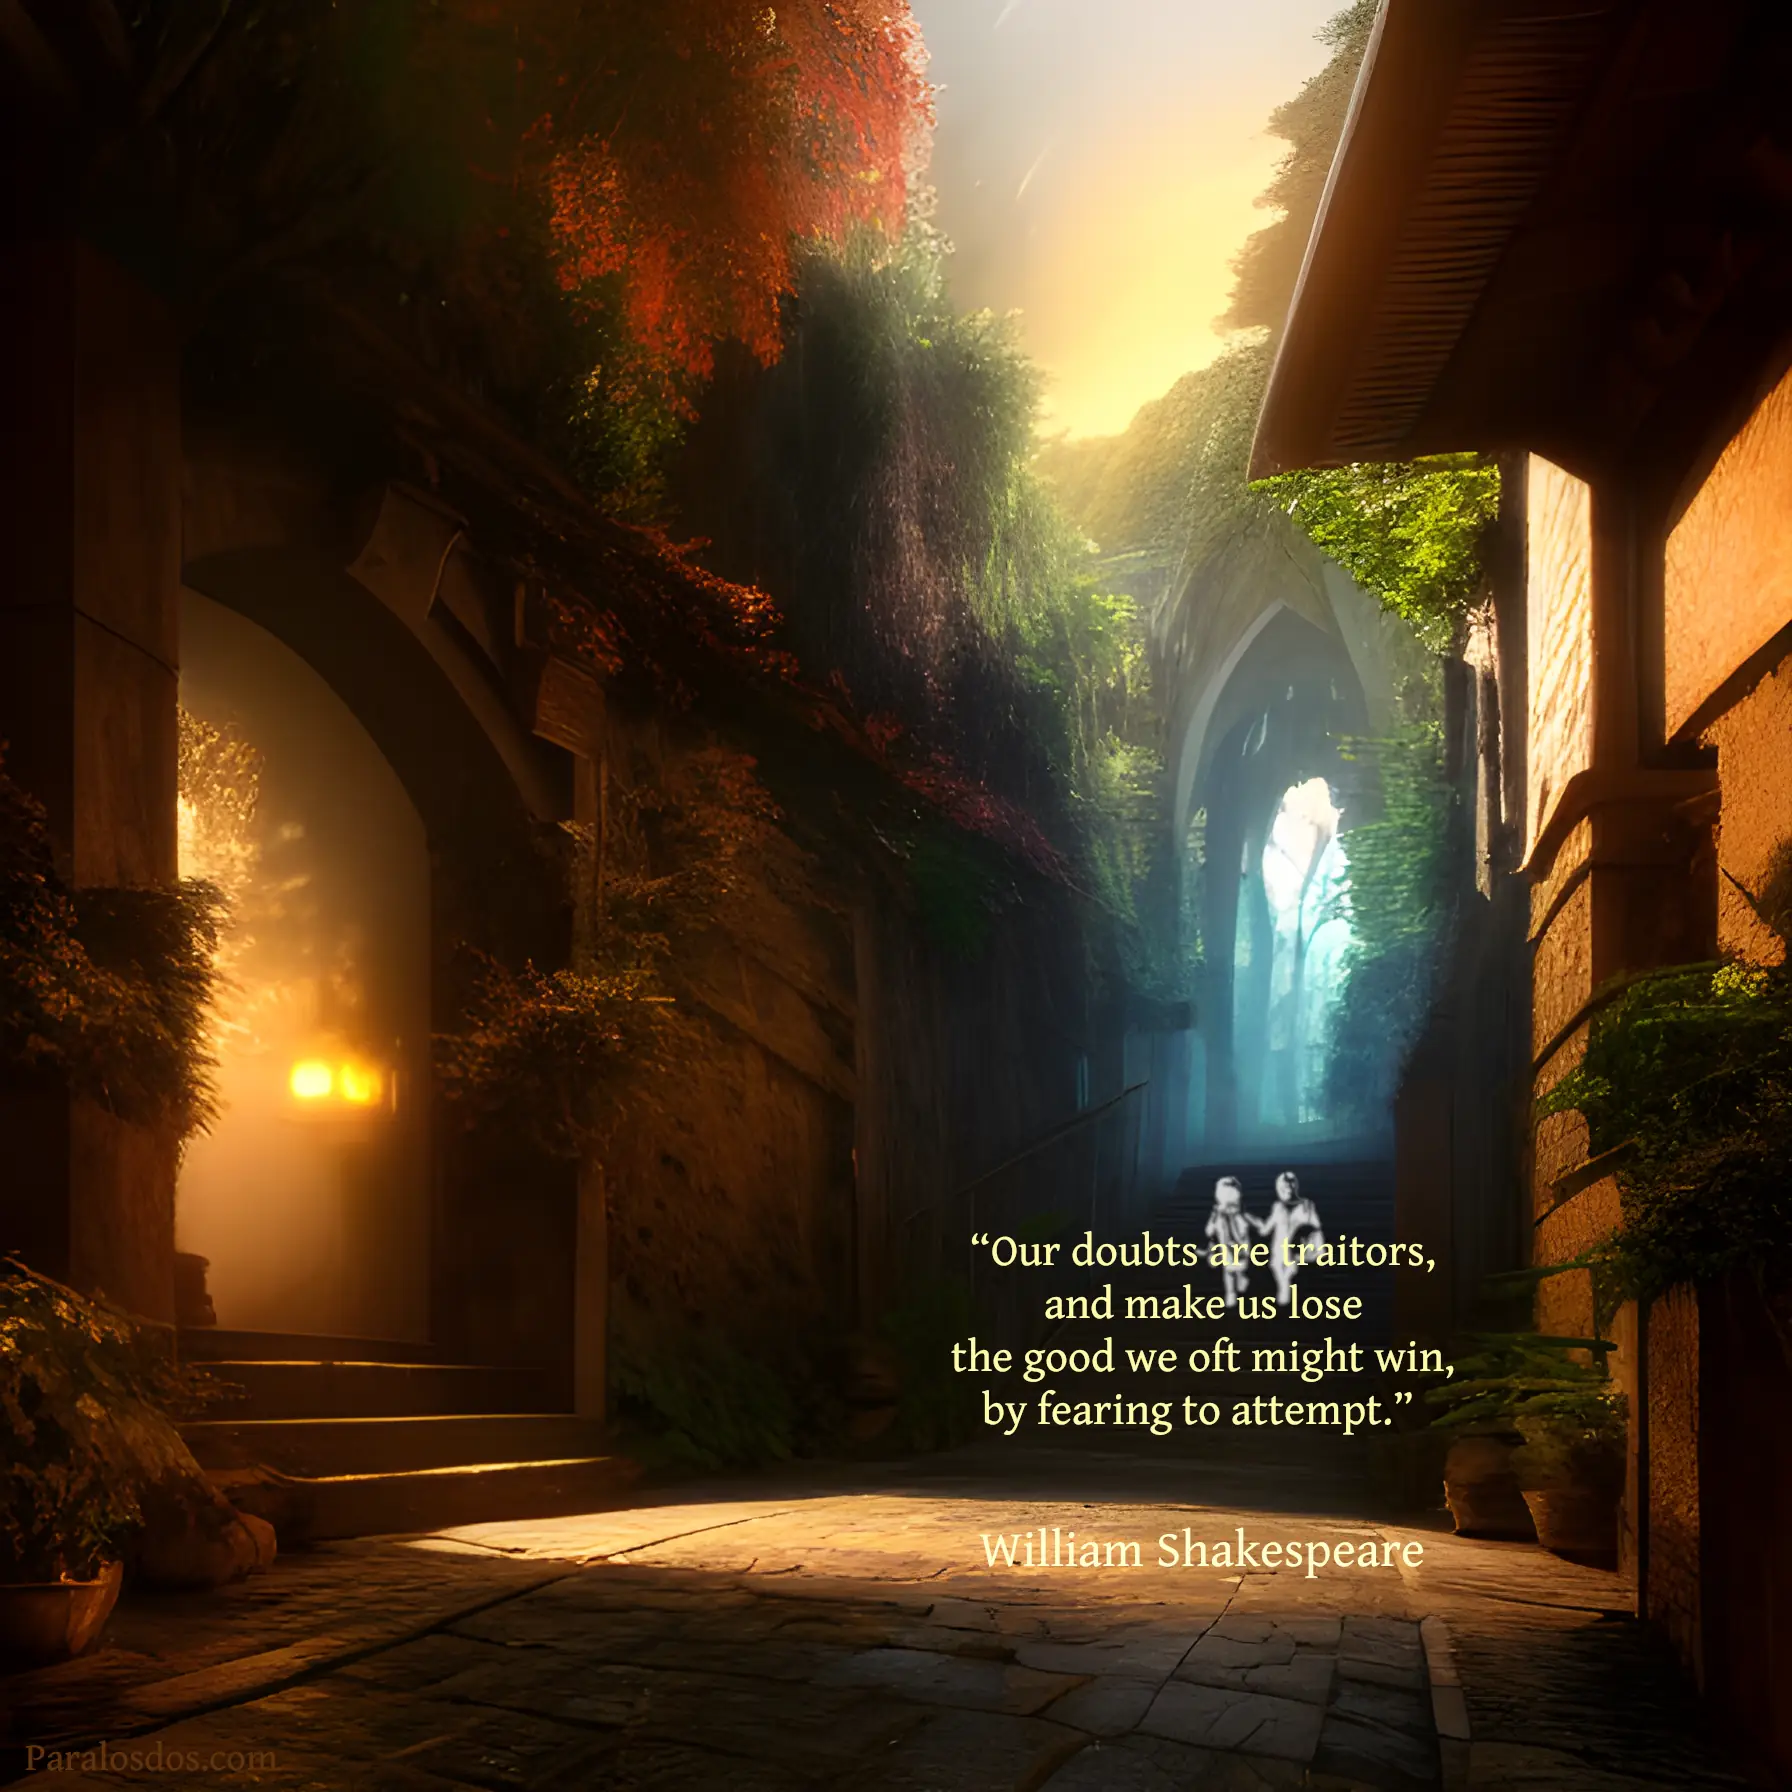 An artistic rendering of a village with a backlit doorway to the left and a backlit opening at the top of some stairs to the center right. The quote reads: “Our doubts are traitors, and make us lose the good we oft might win, by fearing to attempt.” William Shakespeare